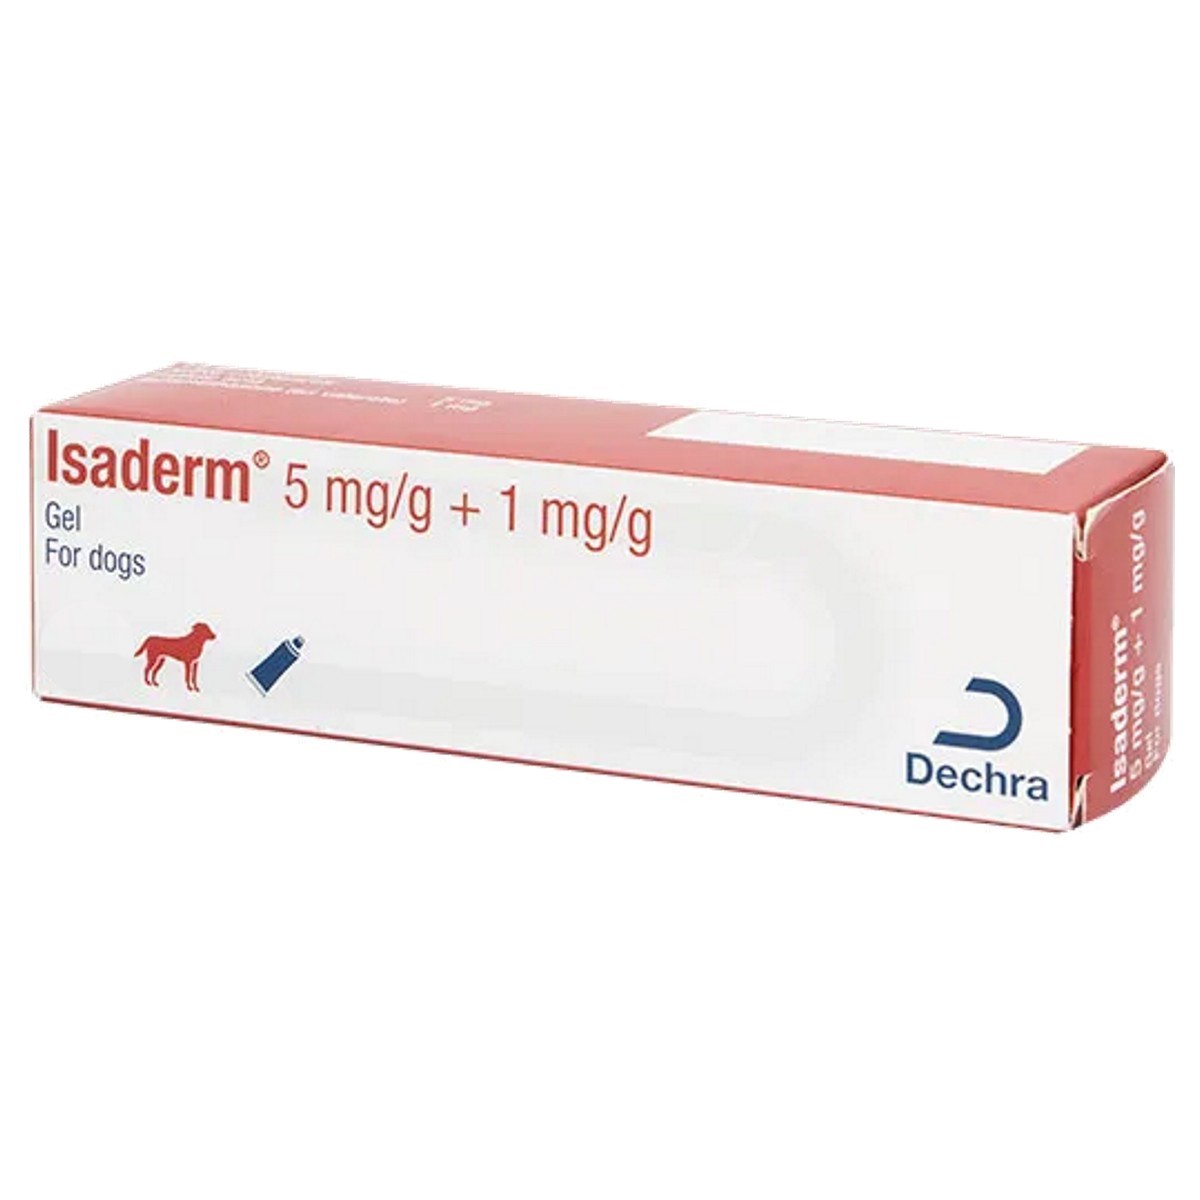 isaderm gel for dogs